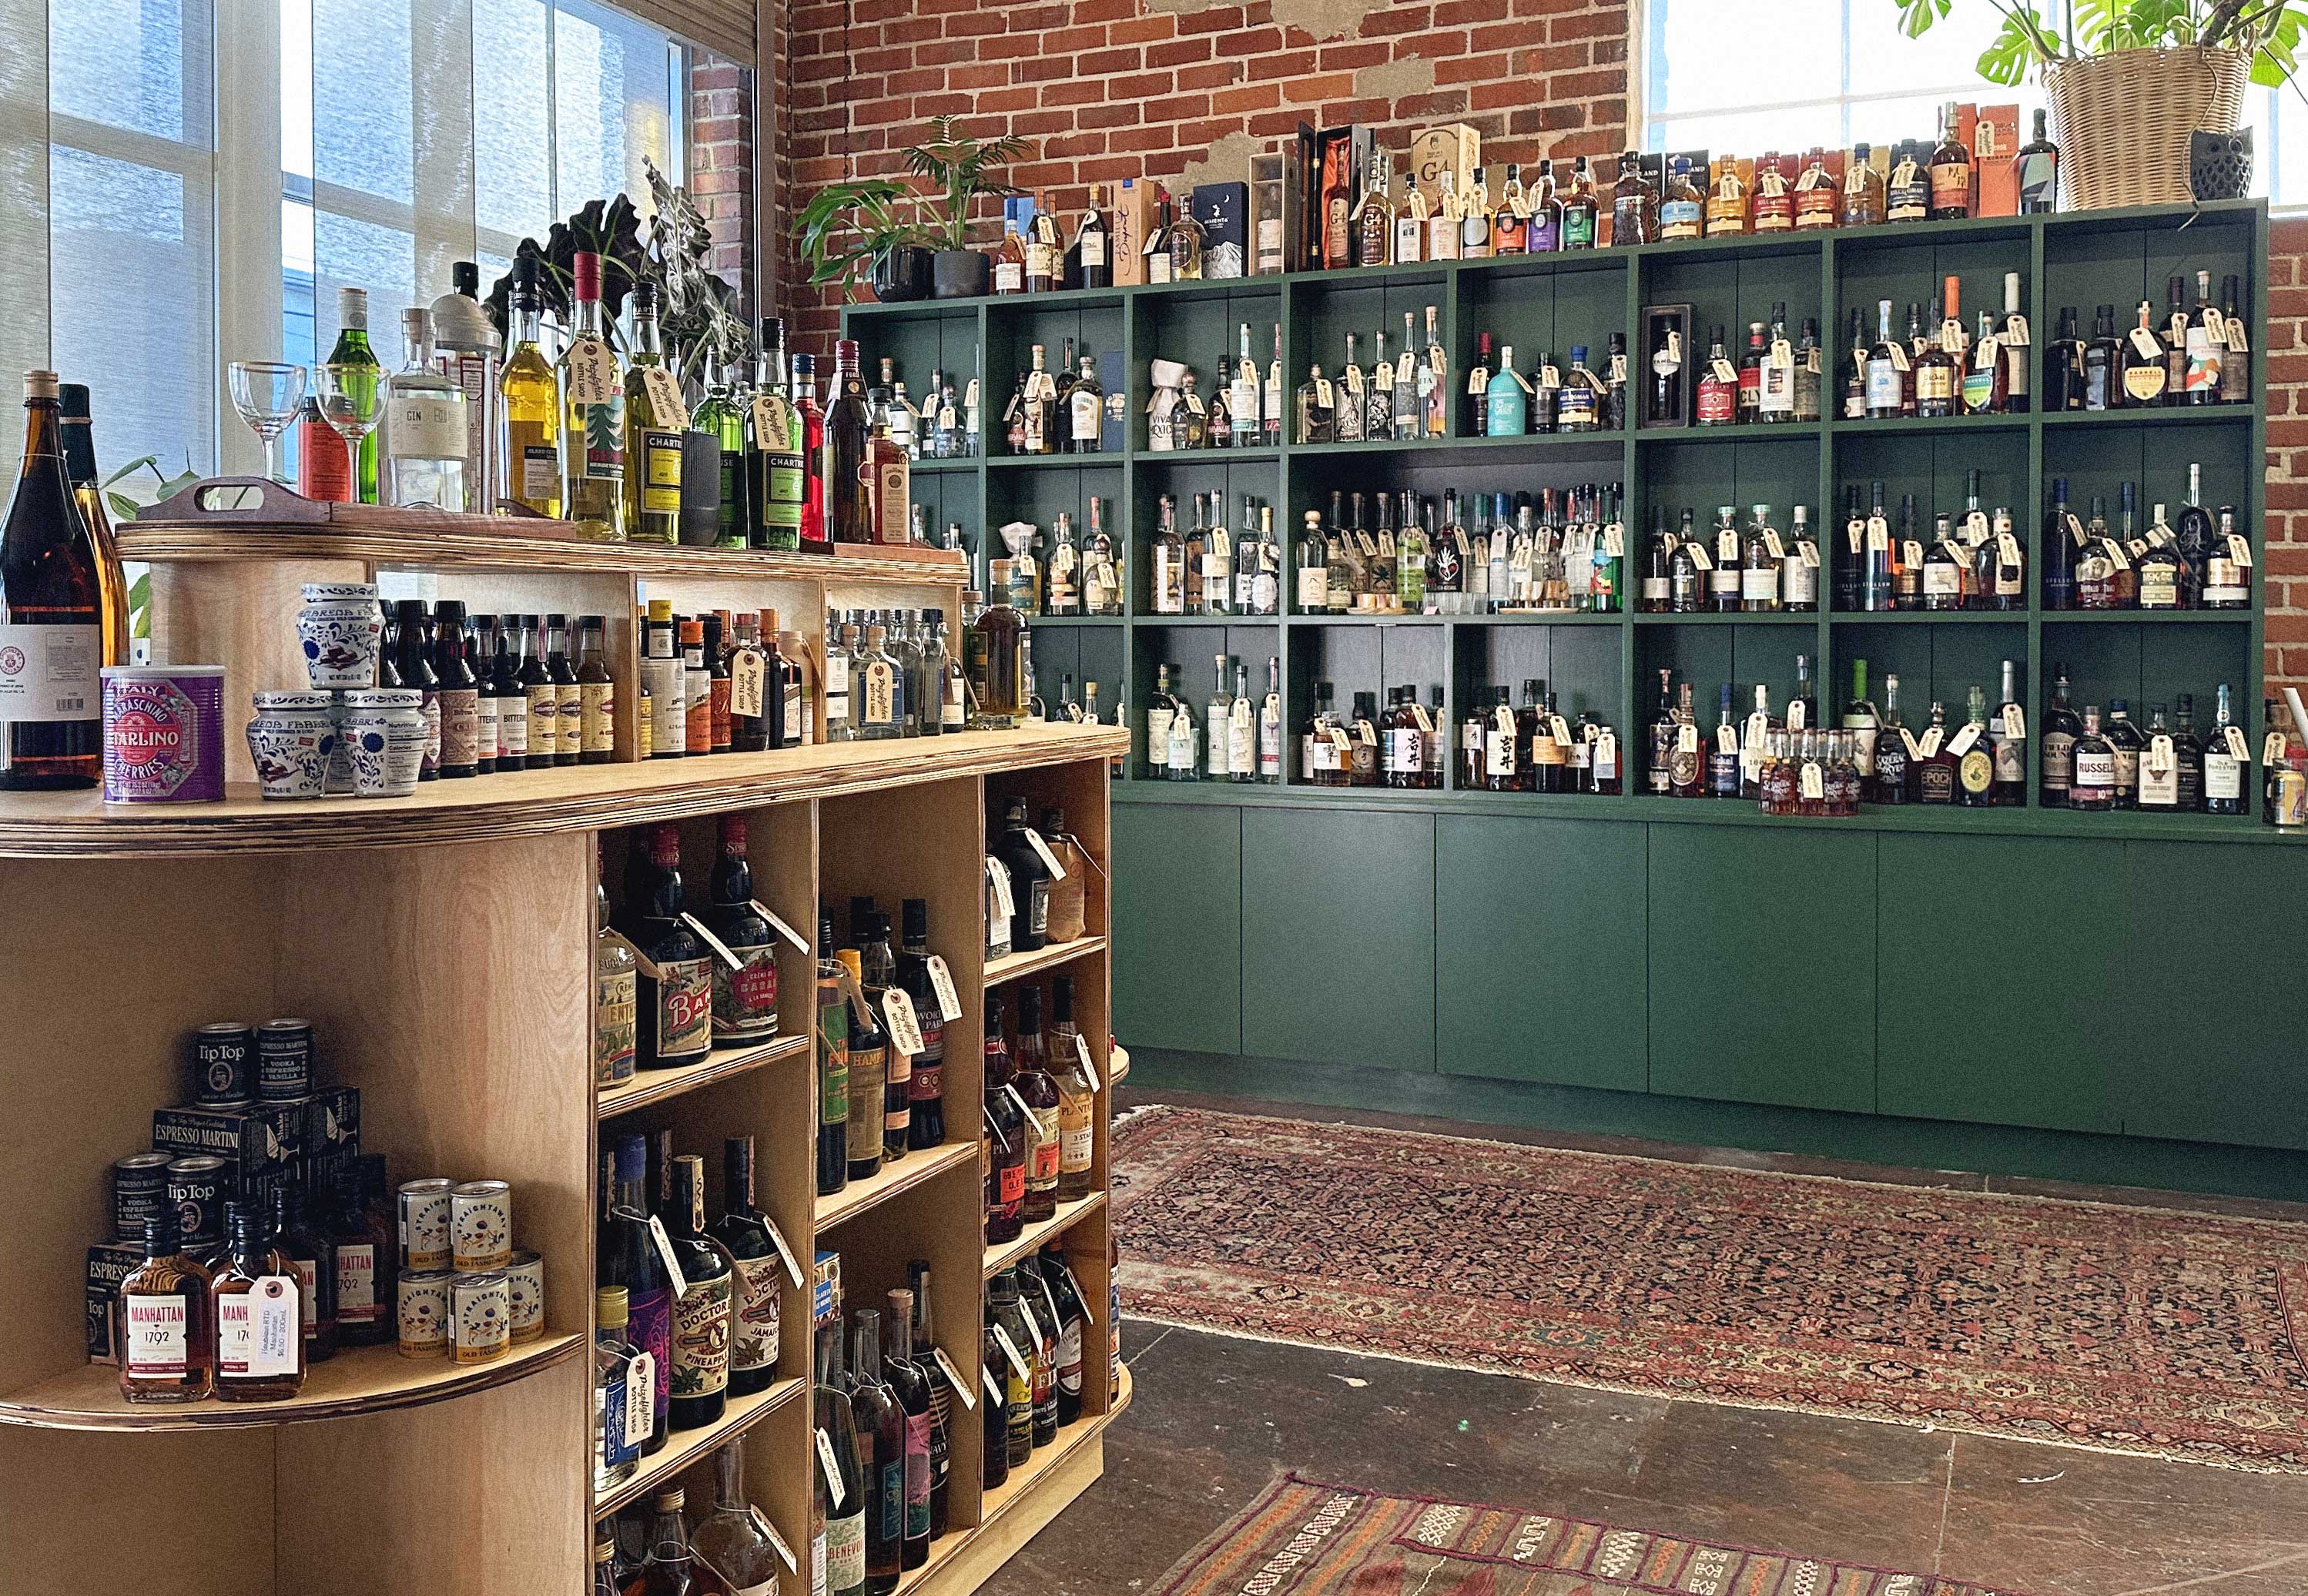 Interior shot of the Prizefighter Bottle Shop showing shelves fully stocked with bottles of spirits and mixers